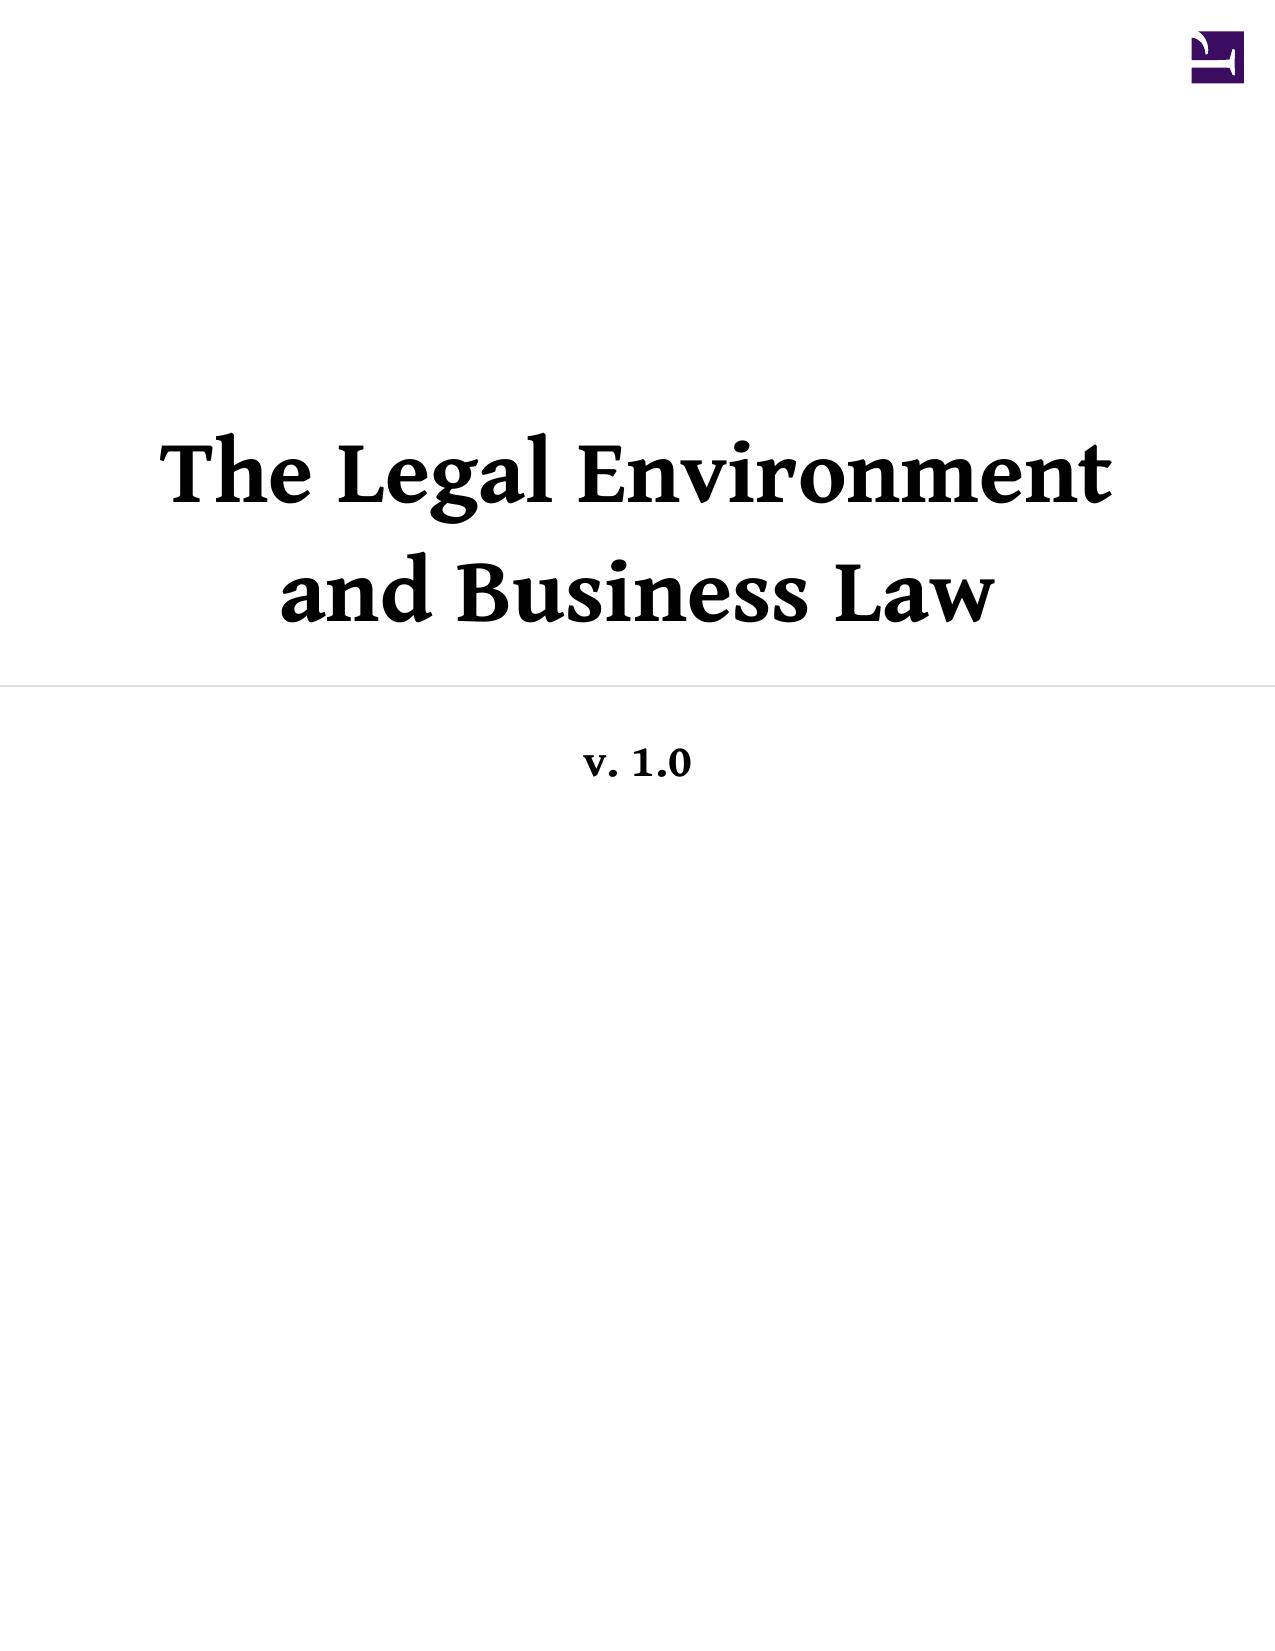 The Legal Environment and Business Law